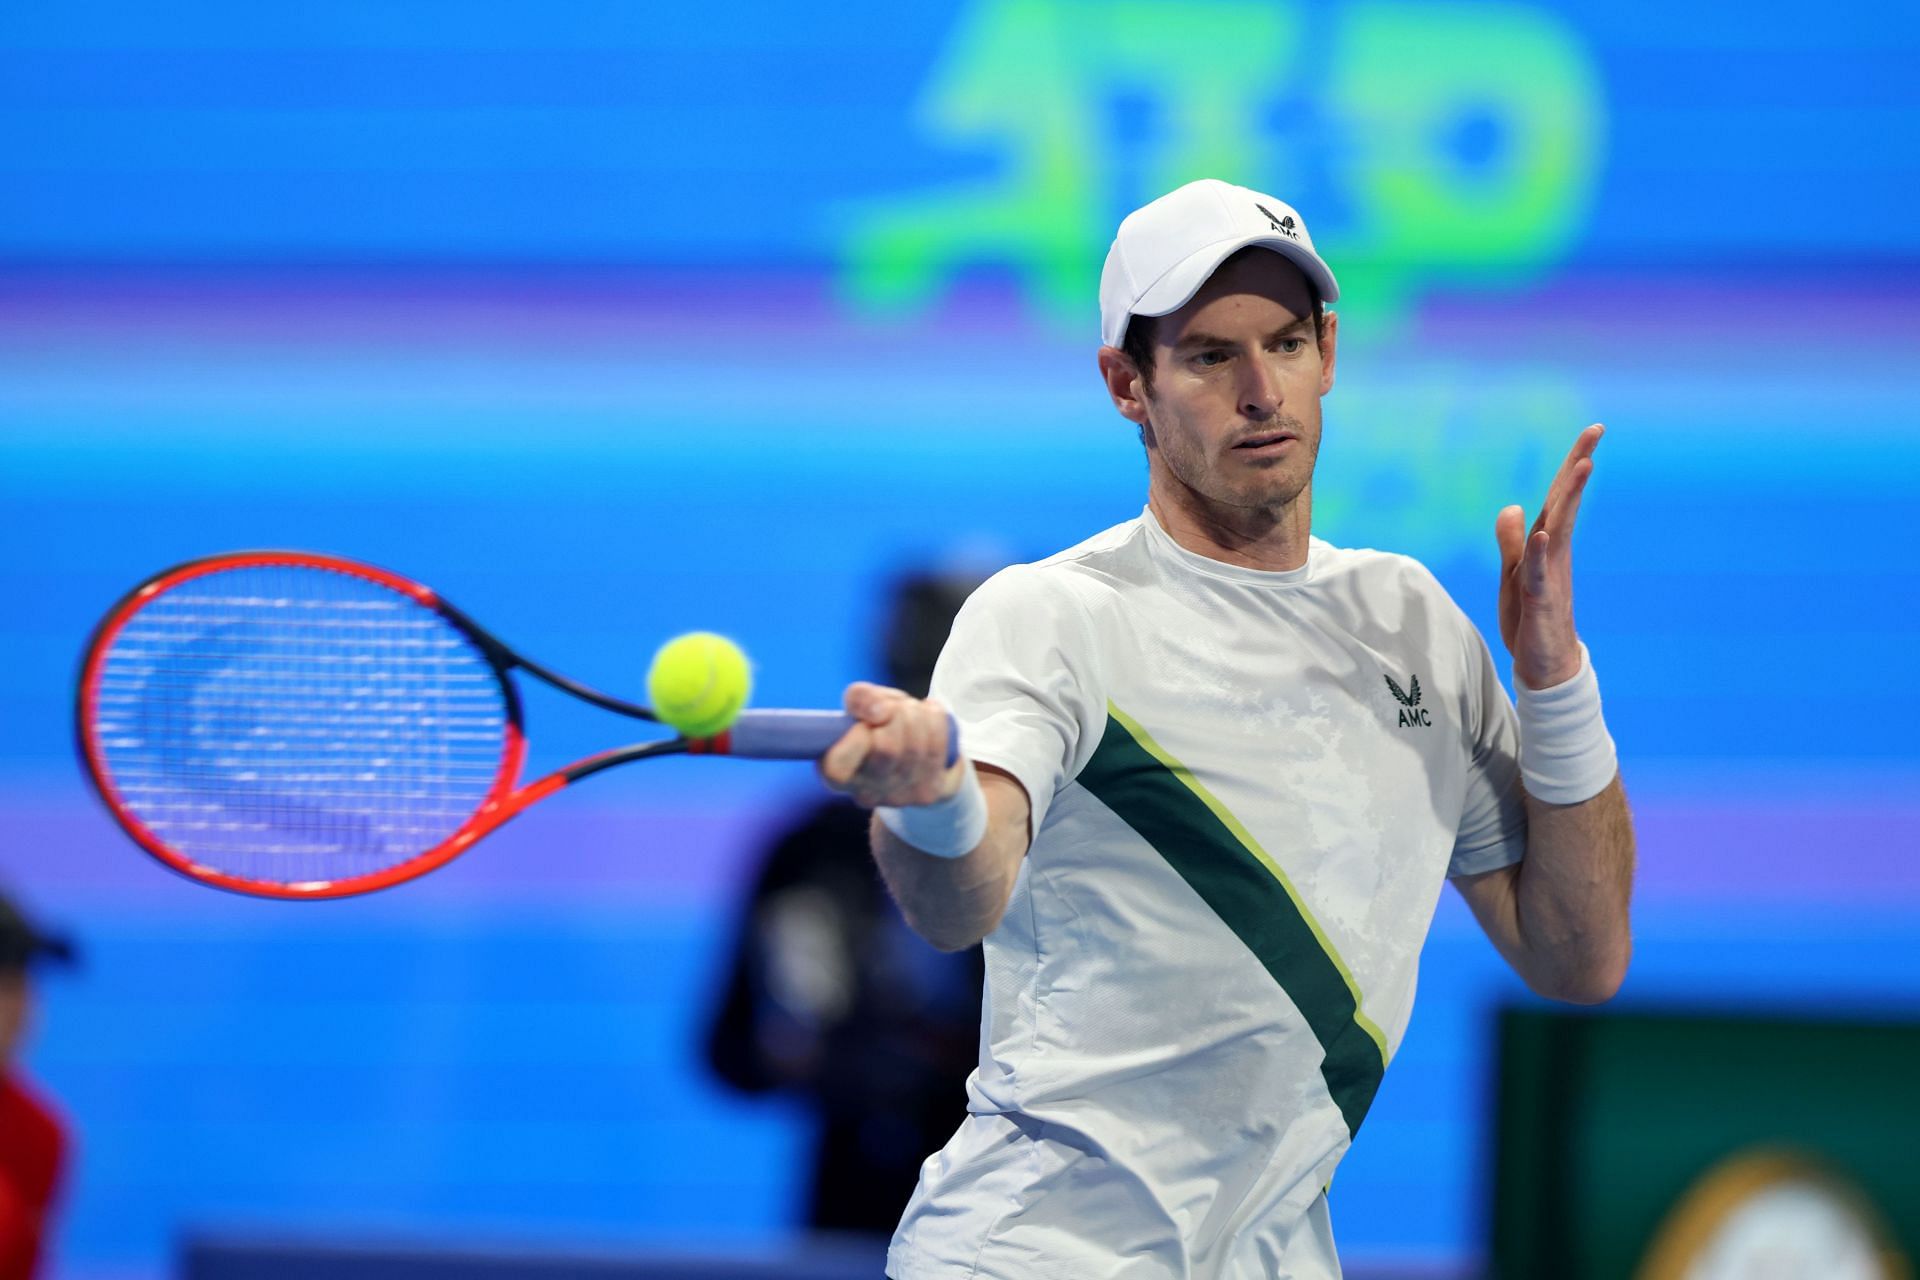 Andy Murray at the Qatar Open